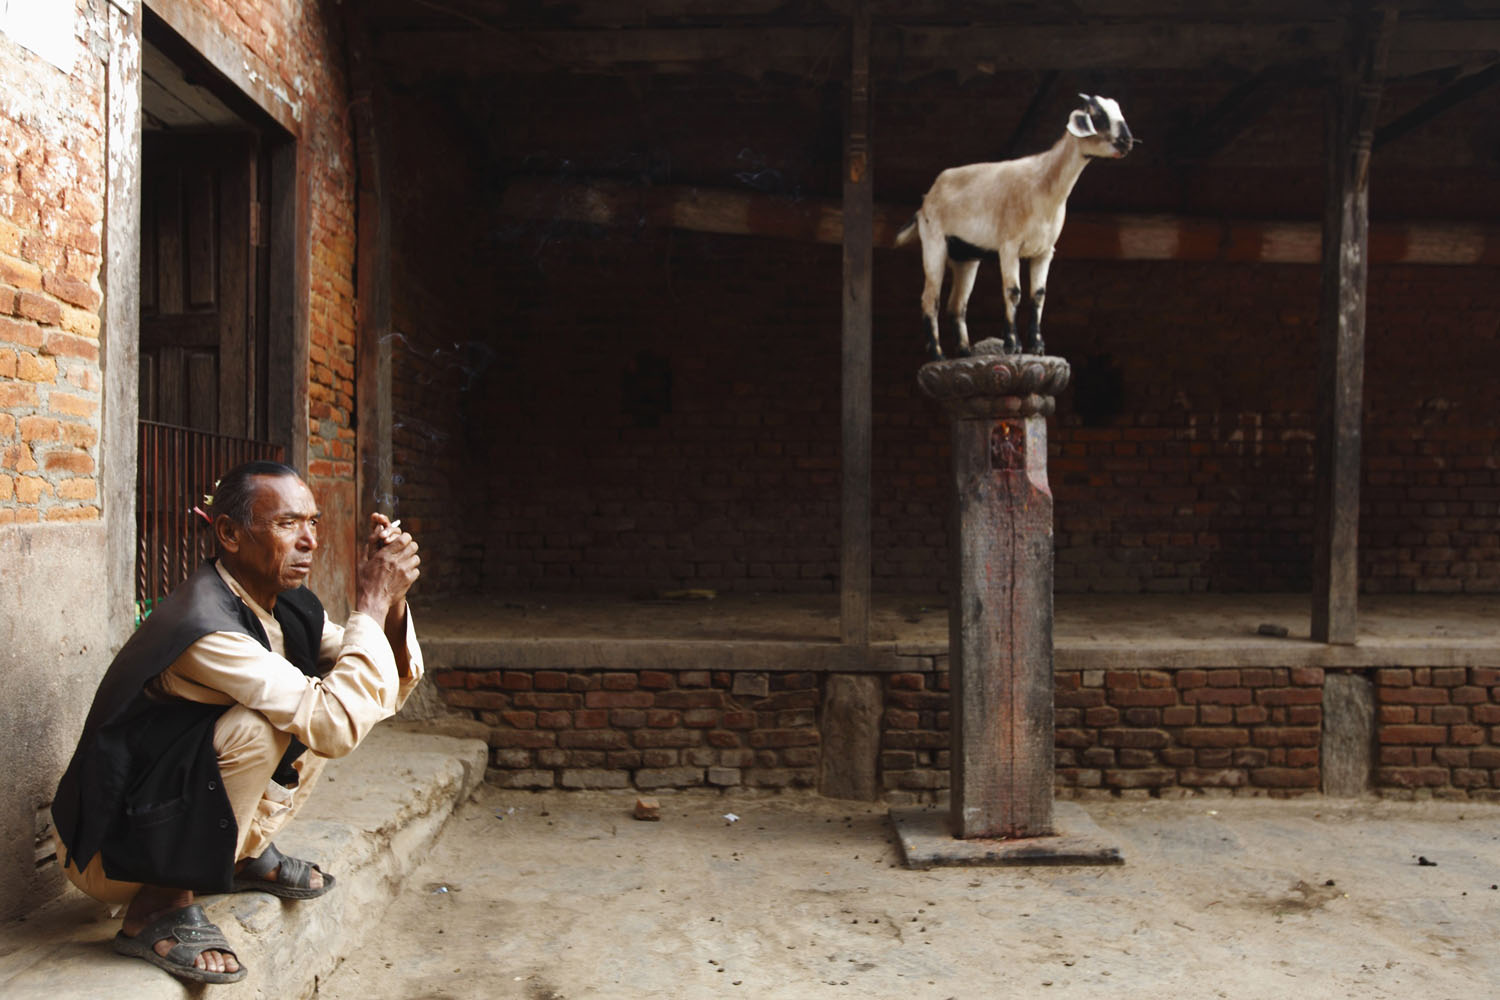 Oct. 9, 2012. A man smokes a cigarette near a goat standing on a pole of a temple at Khokana in Lalitpur, Nepal.